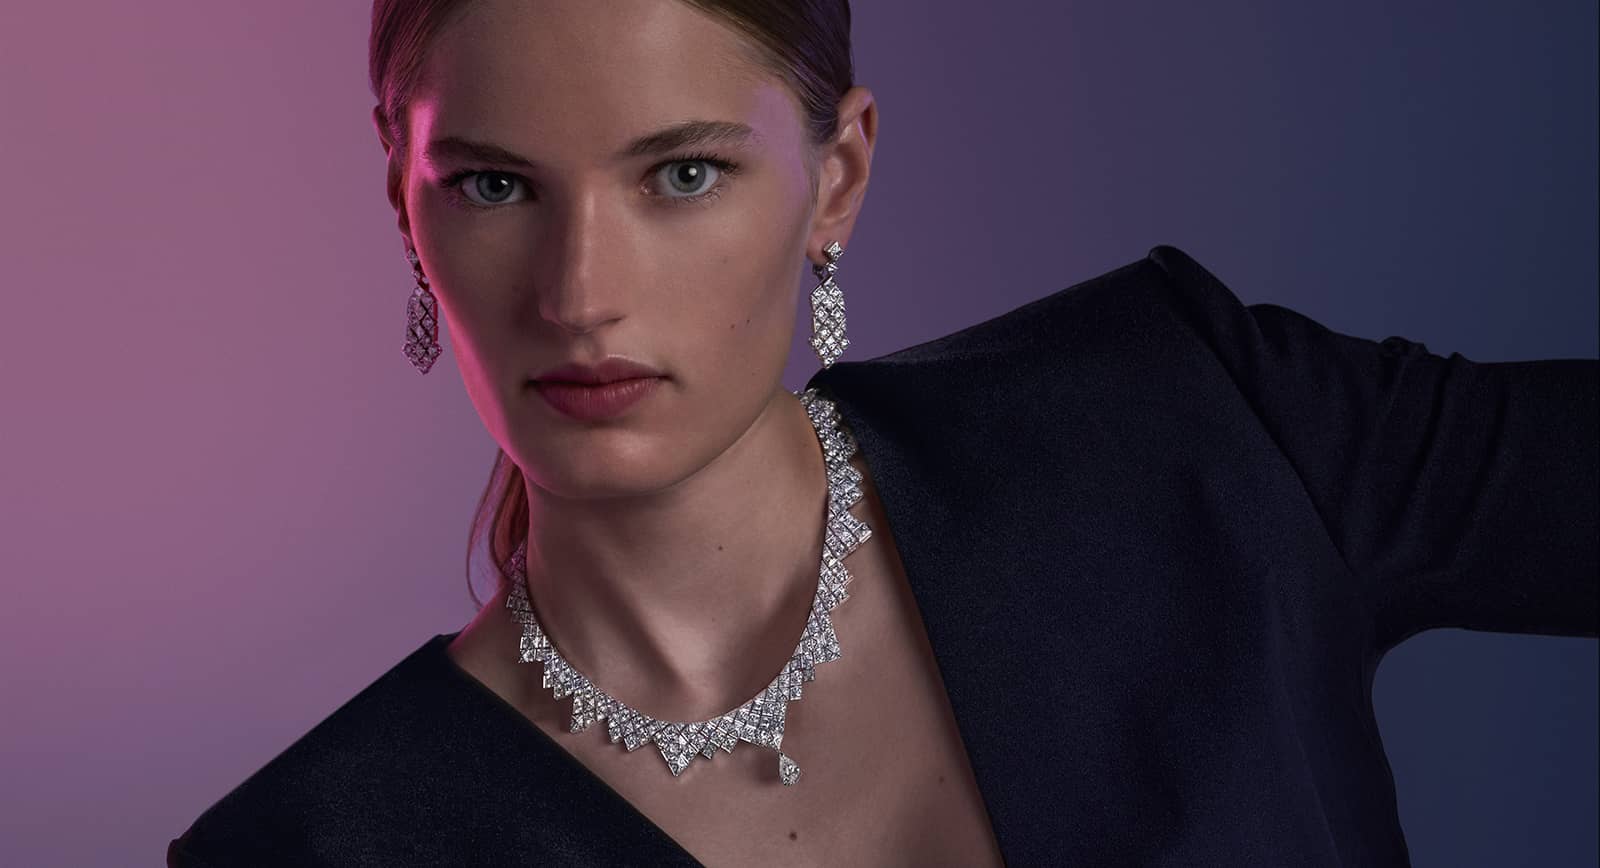 Piaget: Piaget Presents Its New High Jewellery Collection